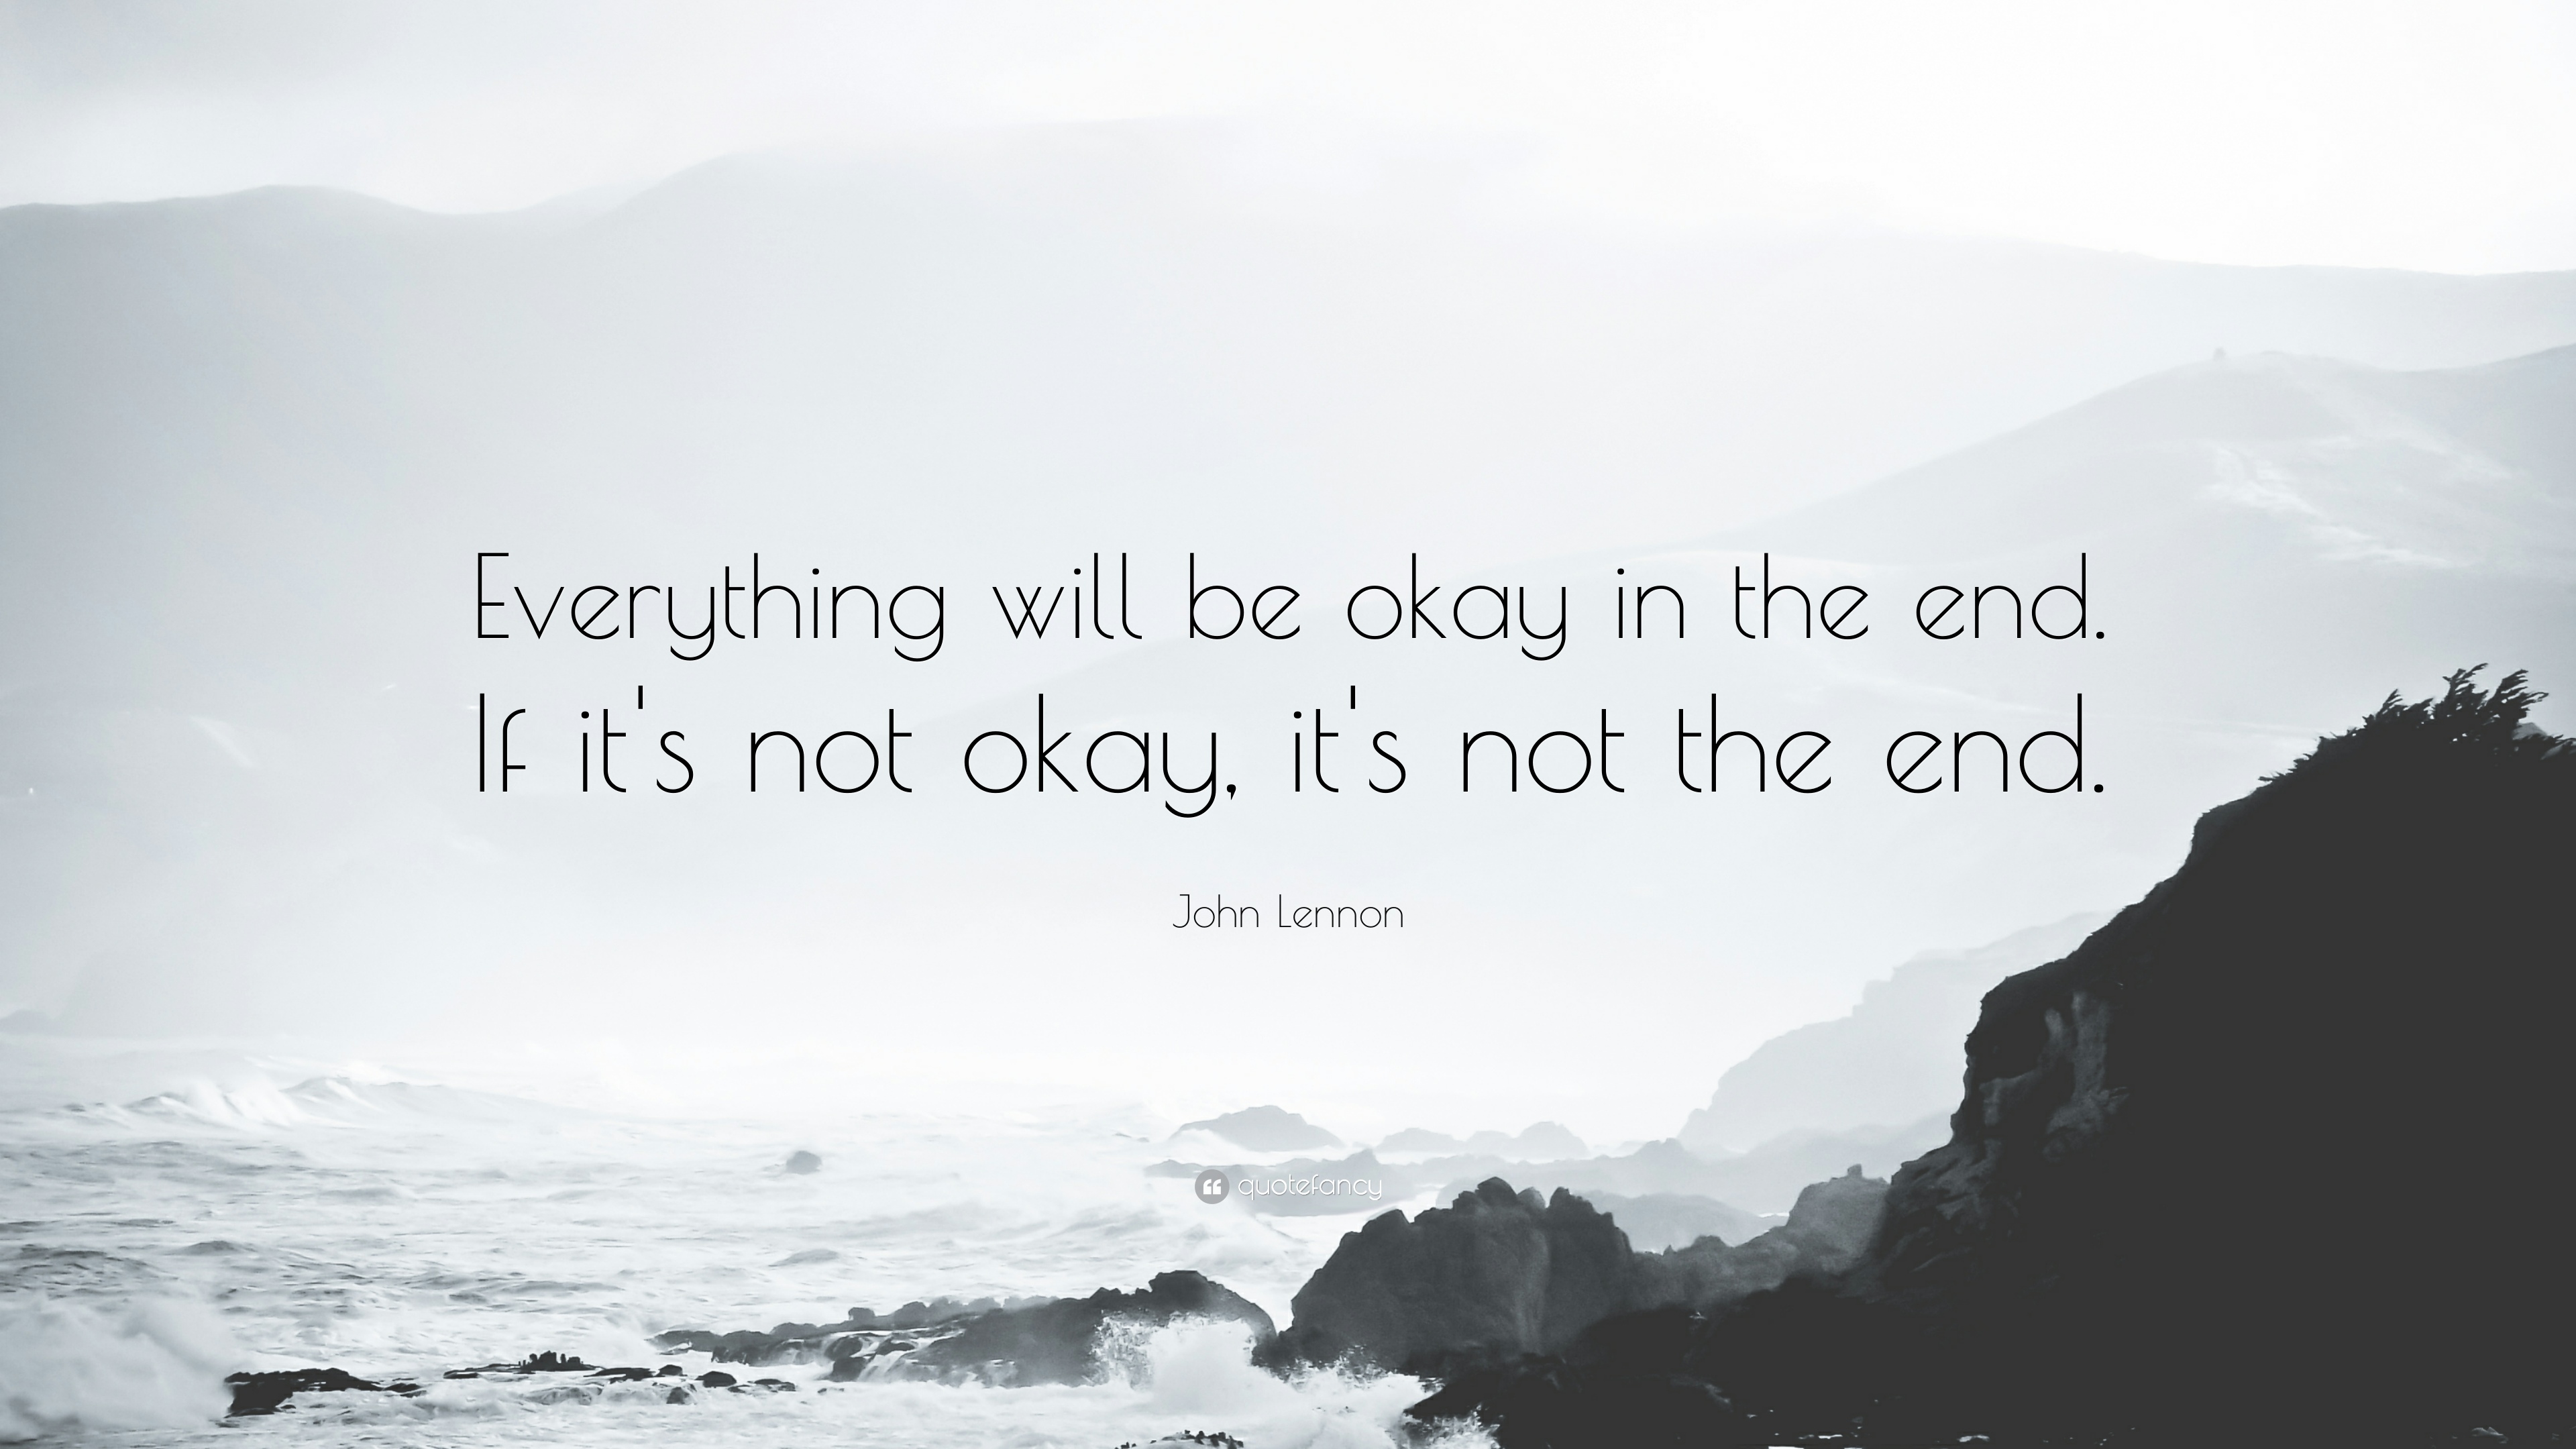 John Lennon Quote Everything will be okay in the end. If its